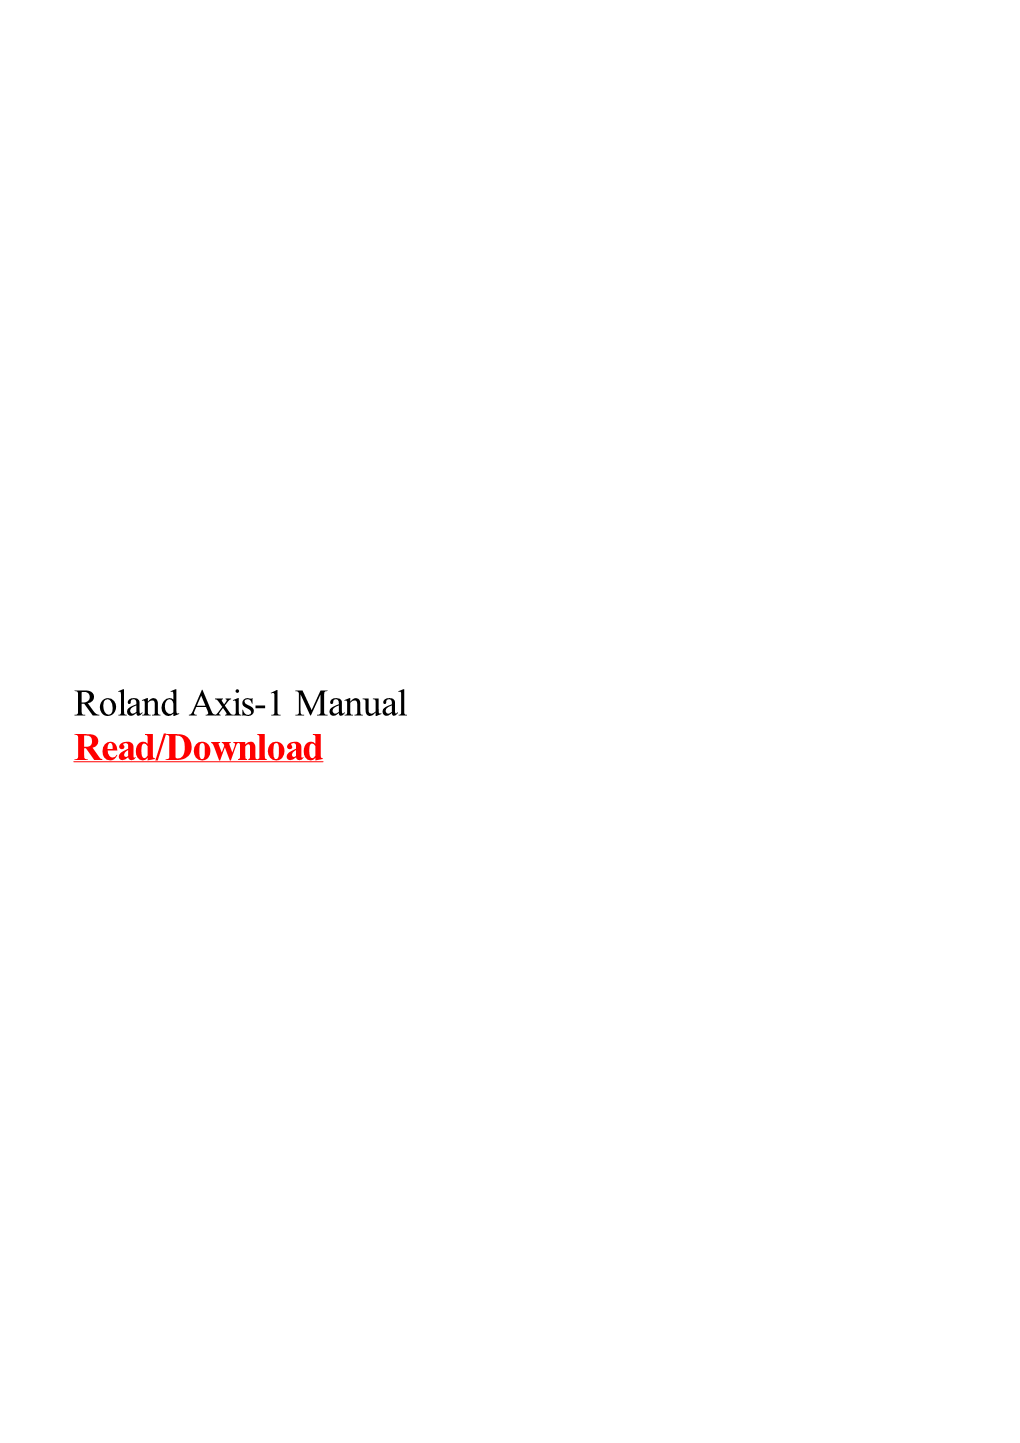 Roland Axis-1 Manual